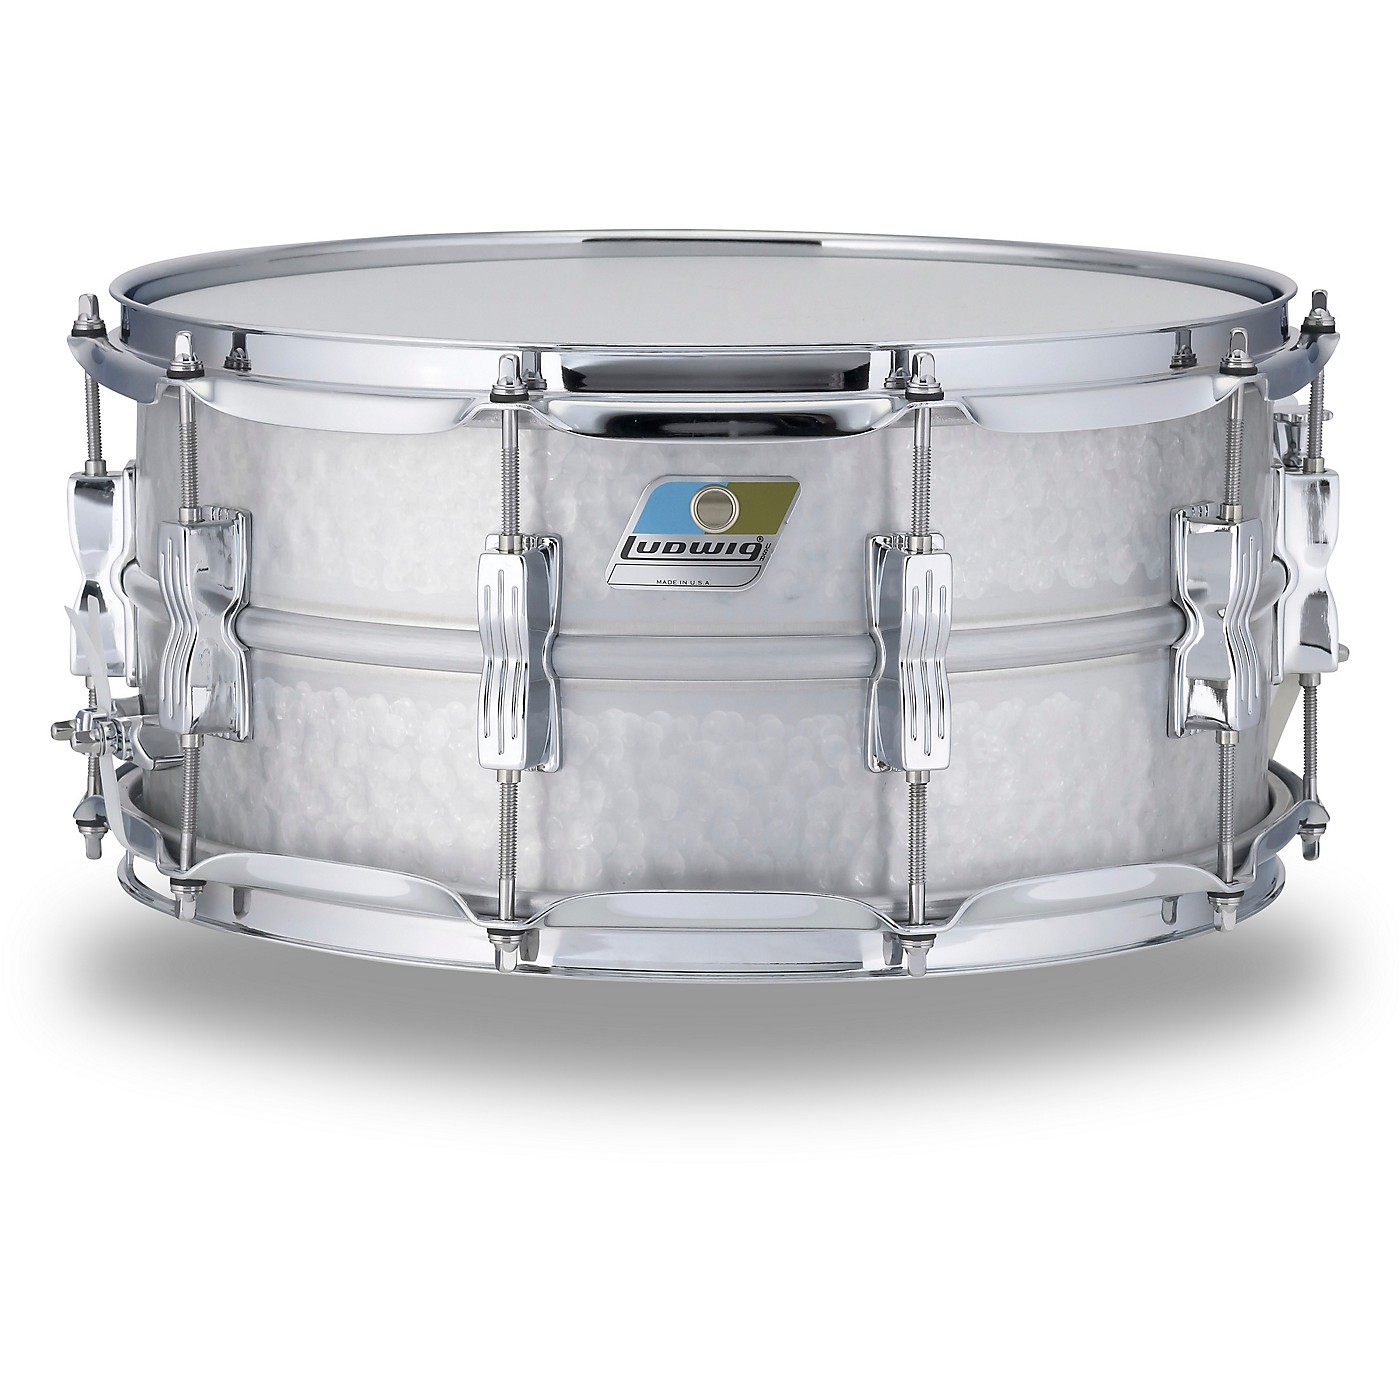 Ludwig Hammered Acrolite Snare Drum thumbnail